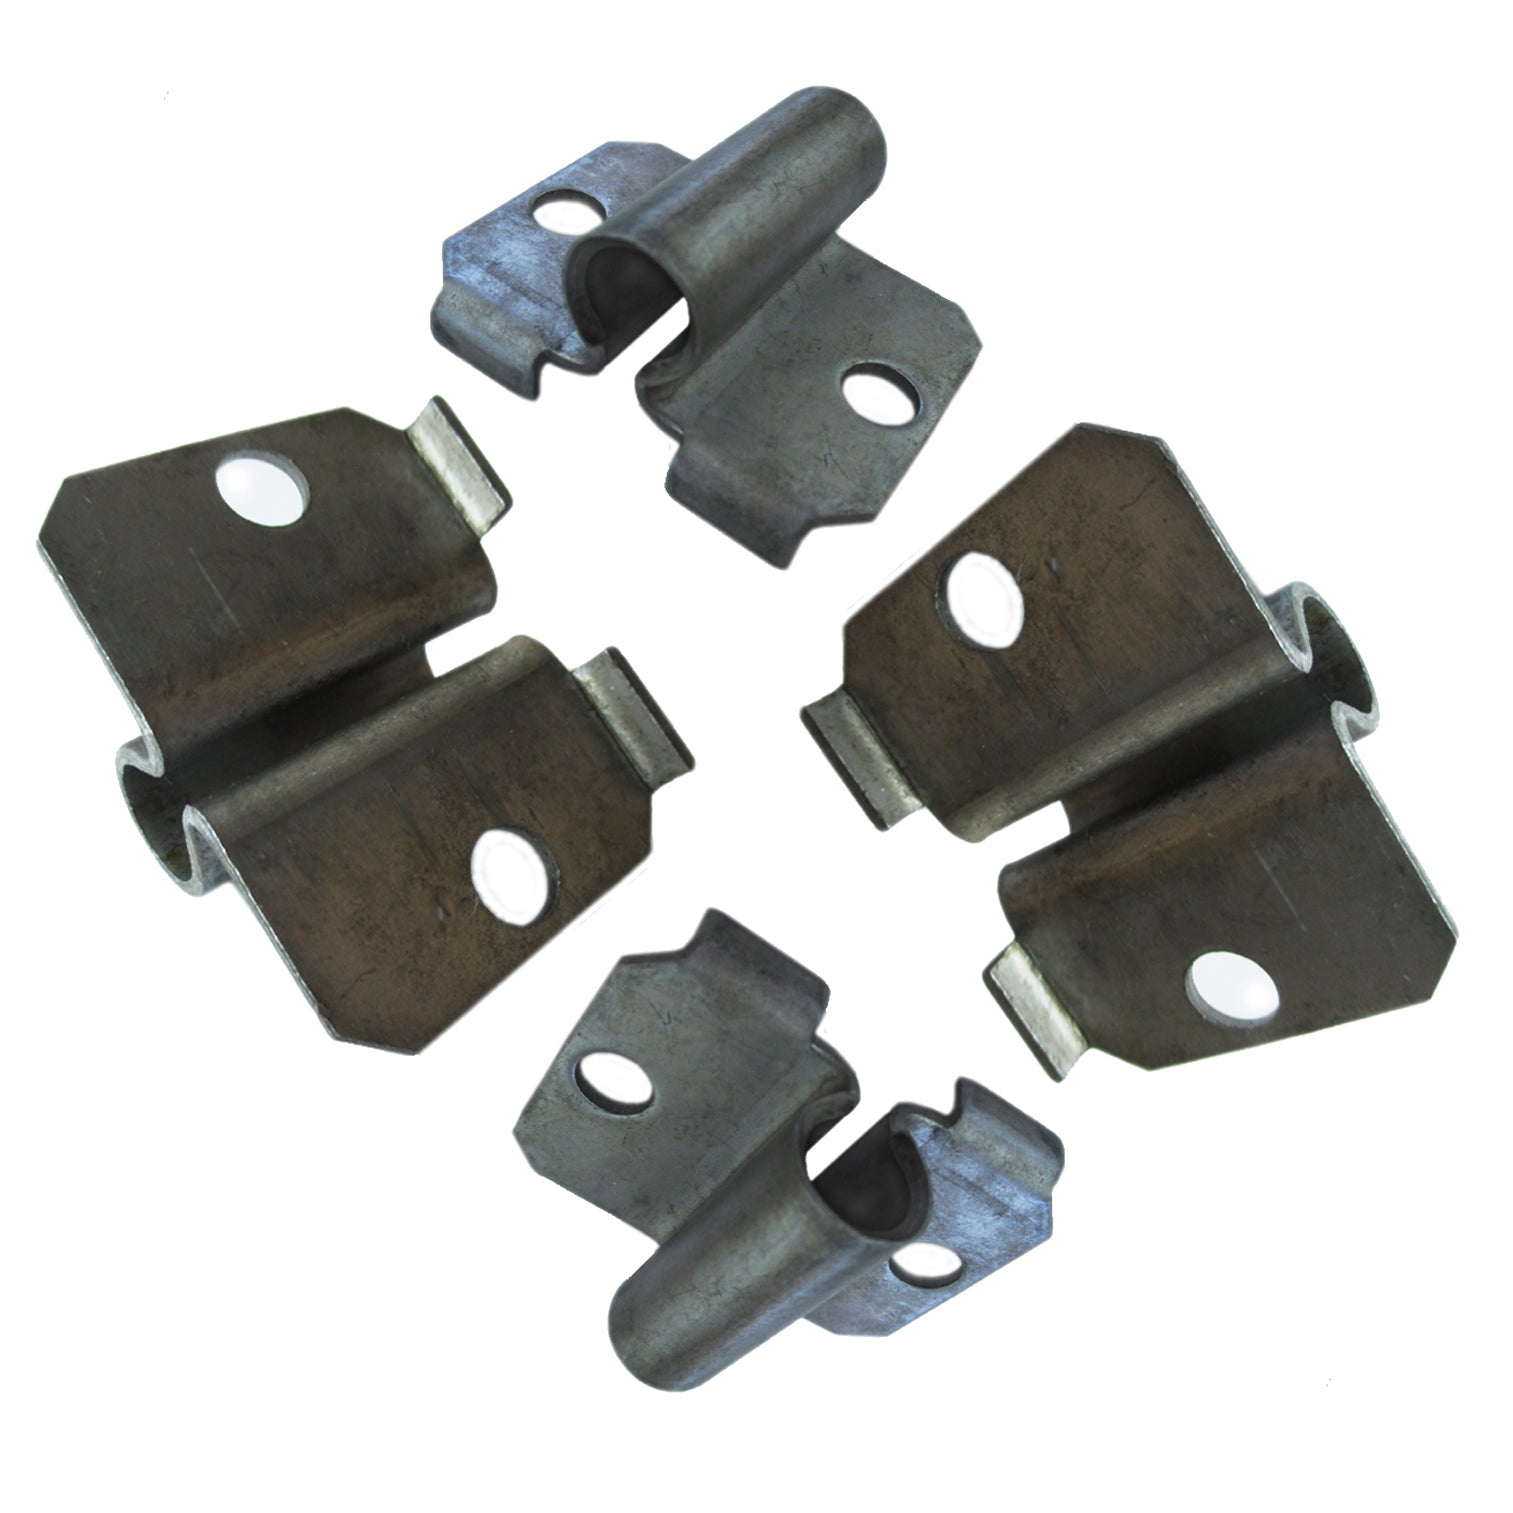 Photo shows a set of four Side Caster Sockets for desks and other furniture.